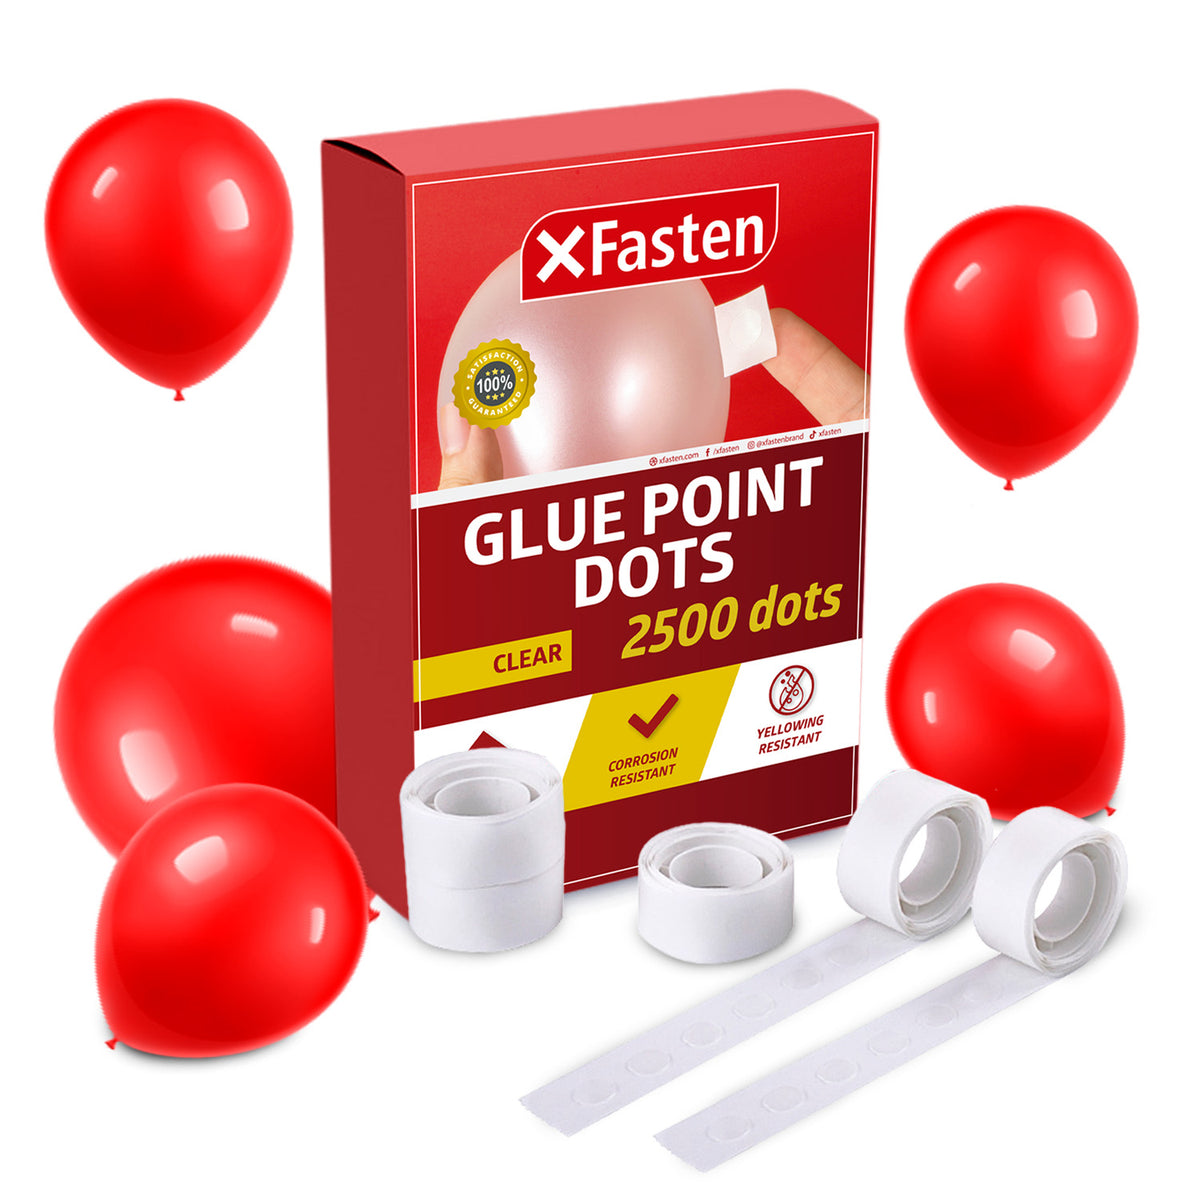 XFasten Balloon Glue Point Dots Clear, Removable, 2500 Pcs (25